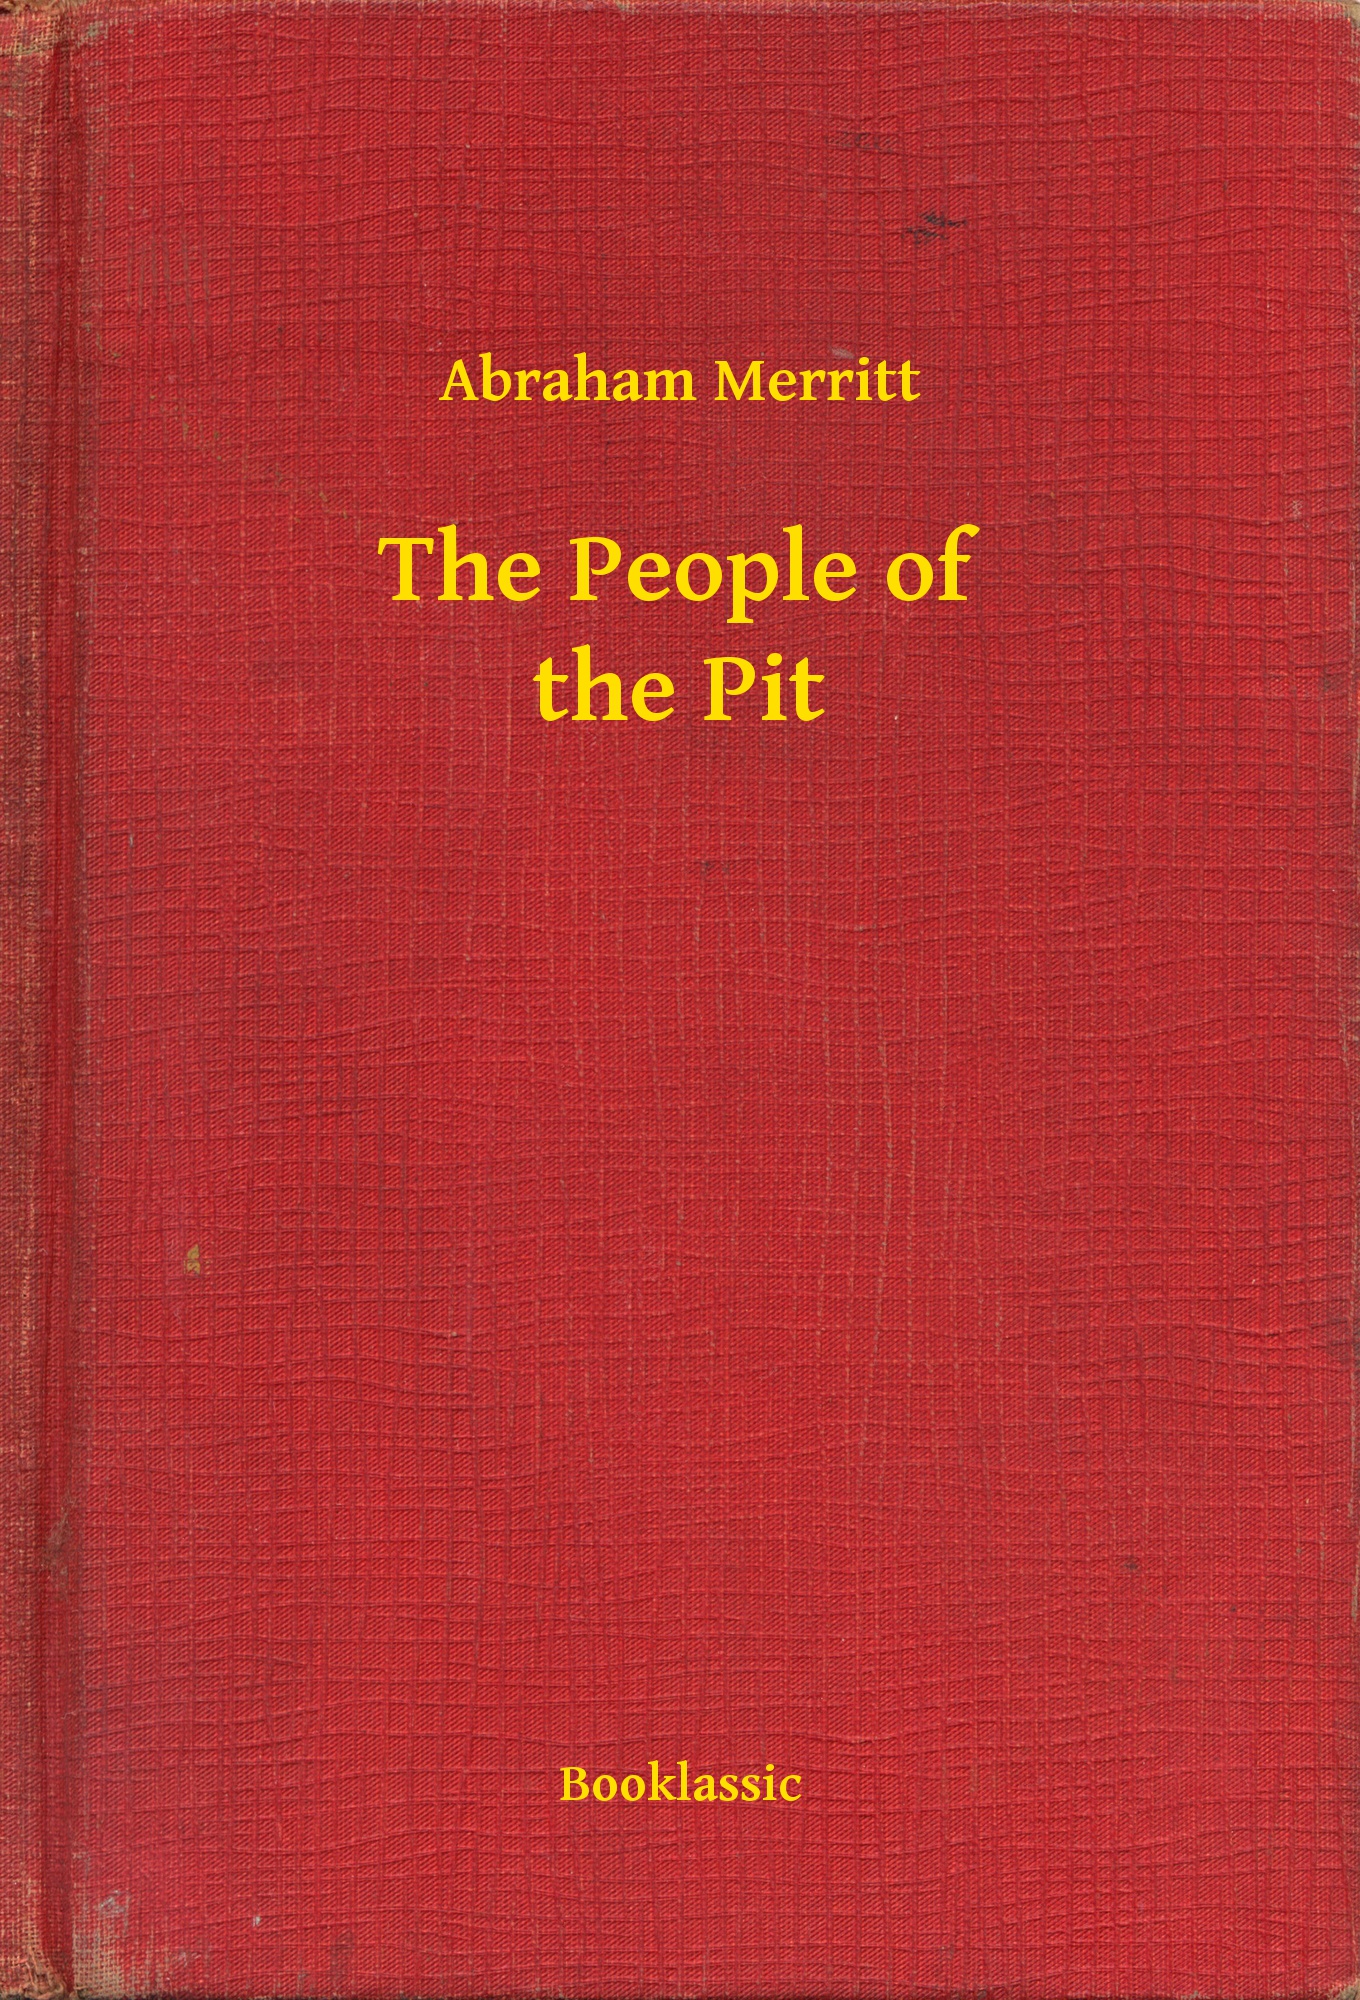 The People of the Pit